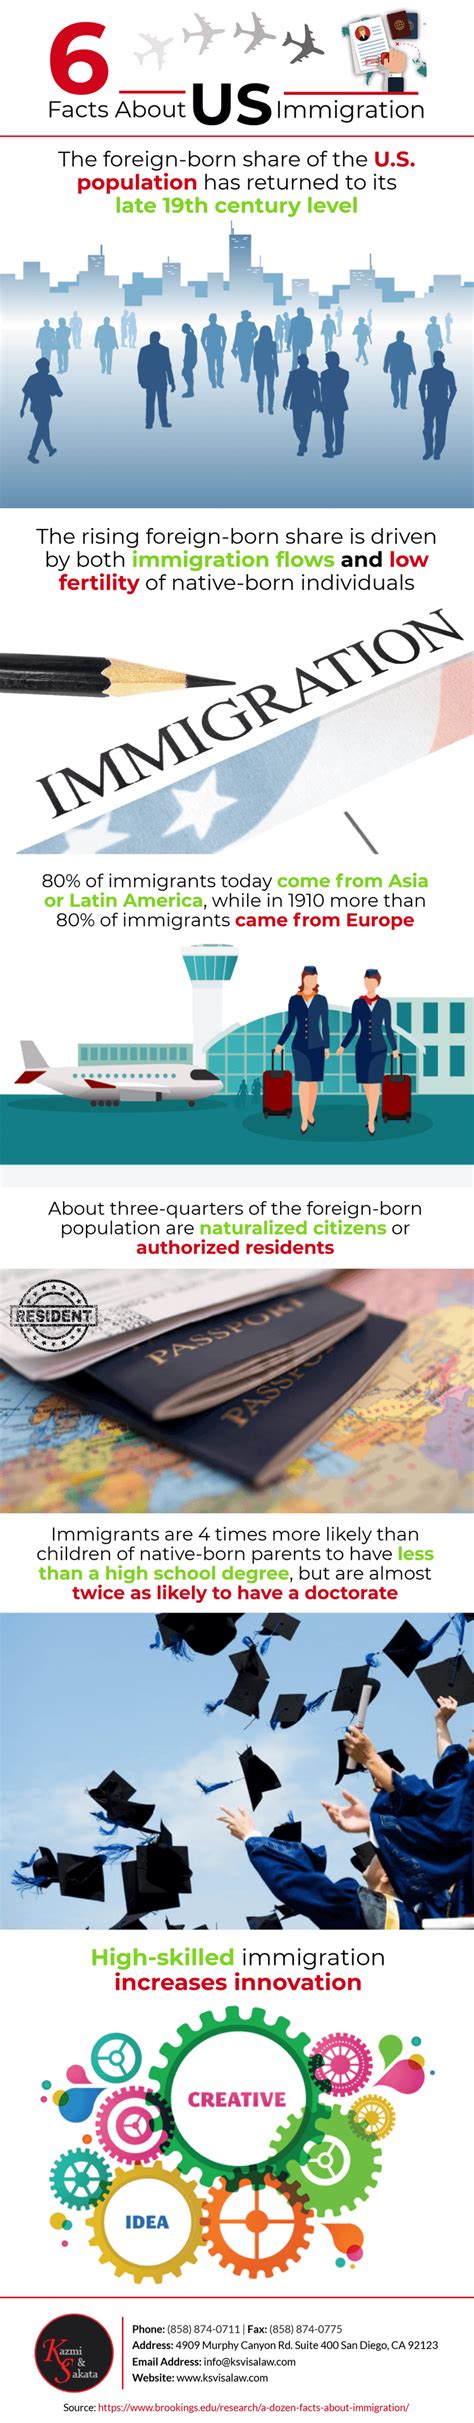 6 facts about us immigration [infographic]